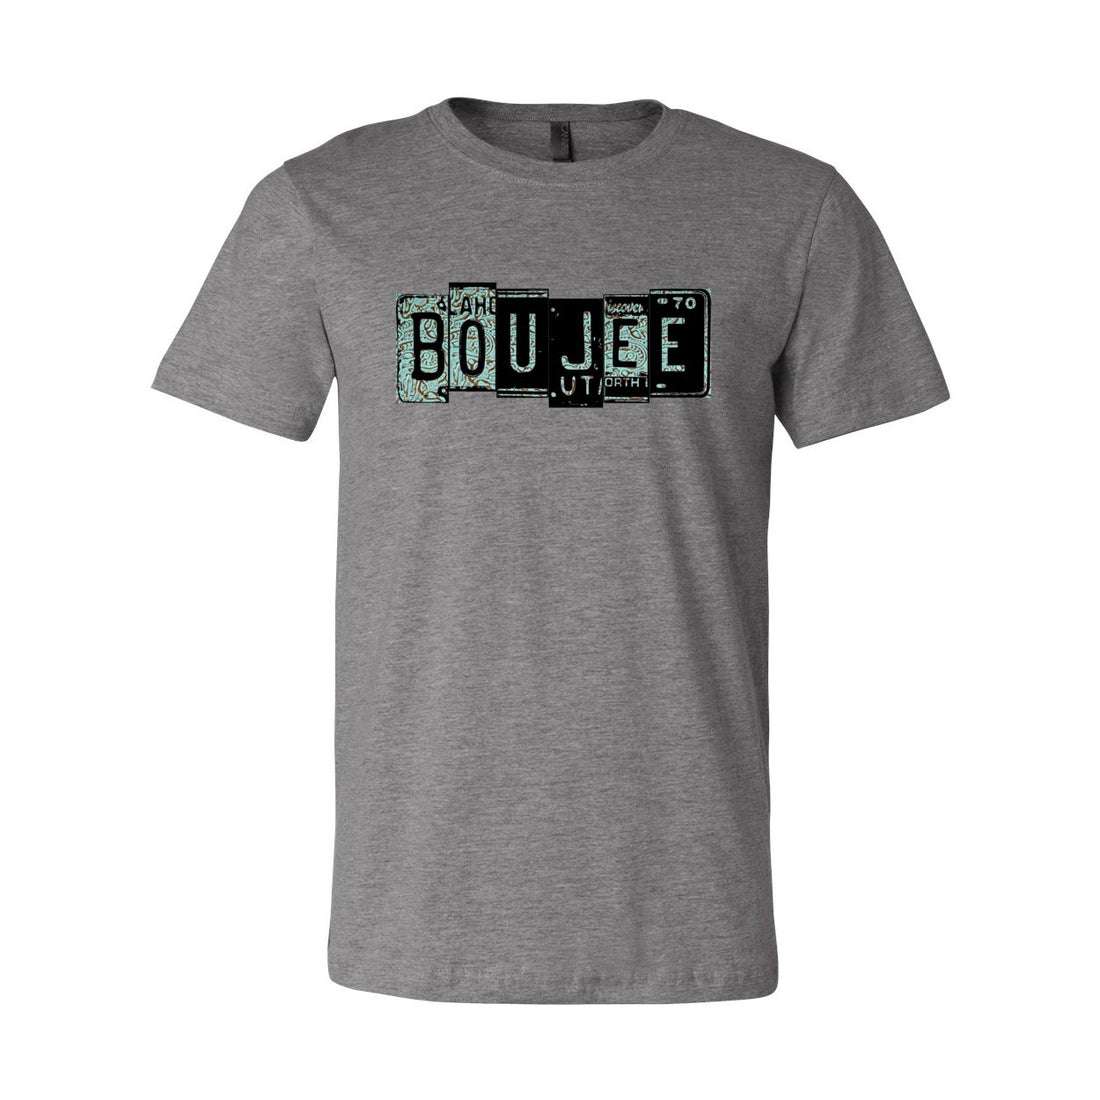 Boujee Plates Jersey Tee - T-Shirts - Positively Sassy - Boujee Plates Jersey Tee